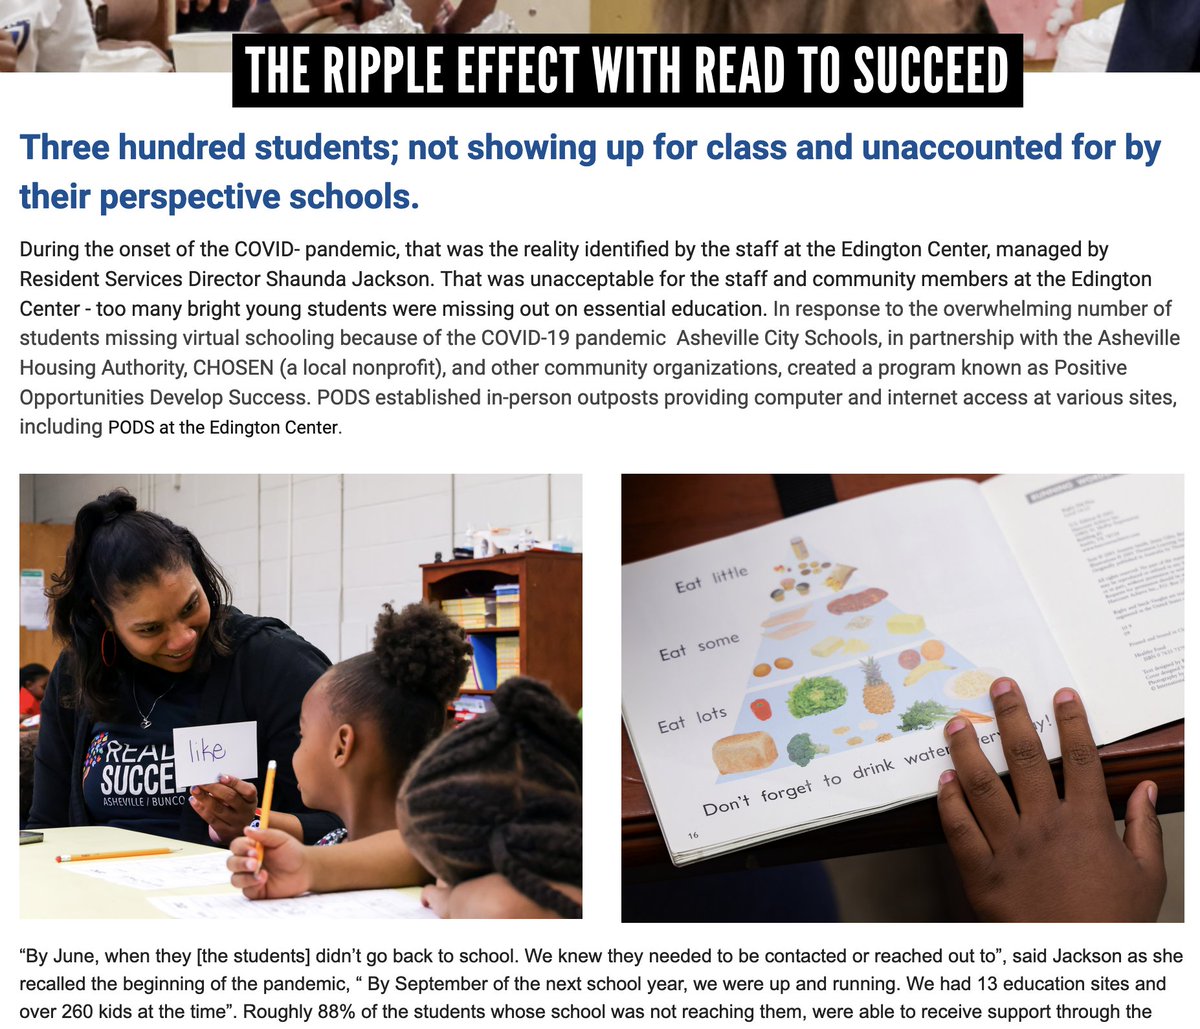 THANK YOU to @UnitedWayABC  for sharing one of Read to Succeed's community impact stories with Chosen PODS at the Arthur R. Edington Center! 🎉 

Read it here > unitedwayabc.org/blog/R2S-highl…

Proud to be part of the #UnitedForYouth action network in #AVL and #BuncombeCounty!